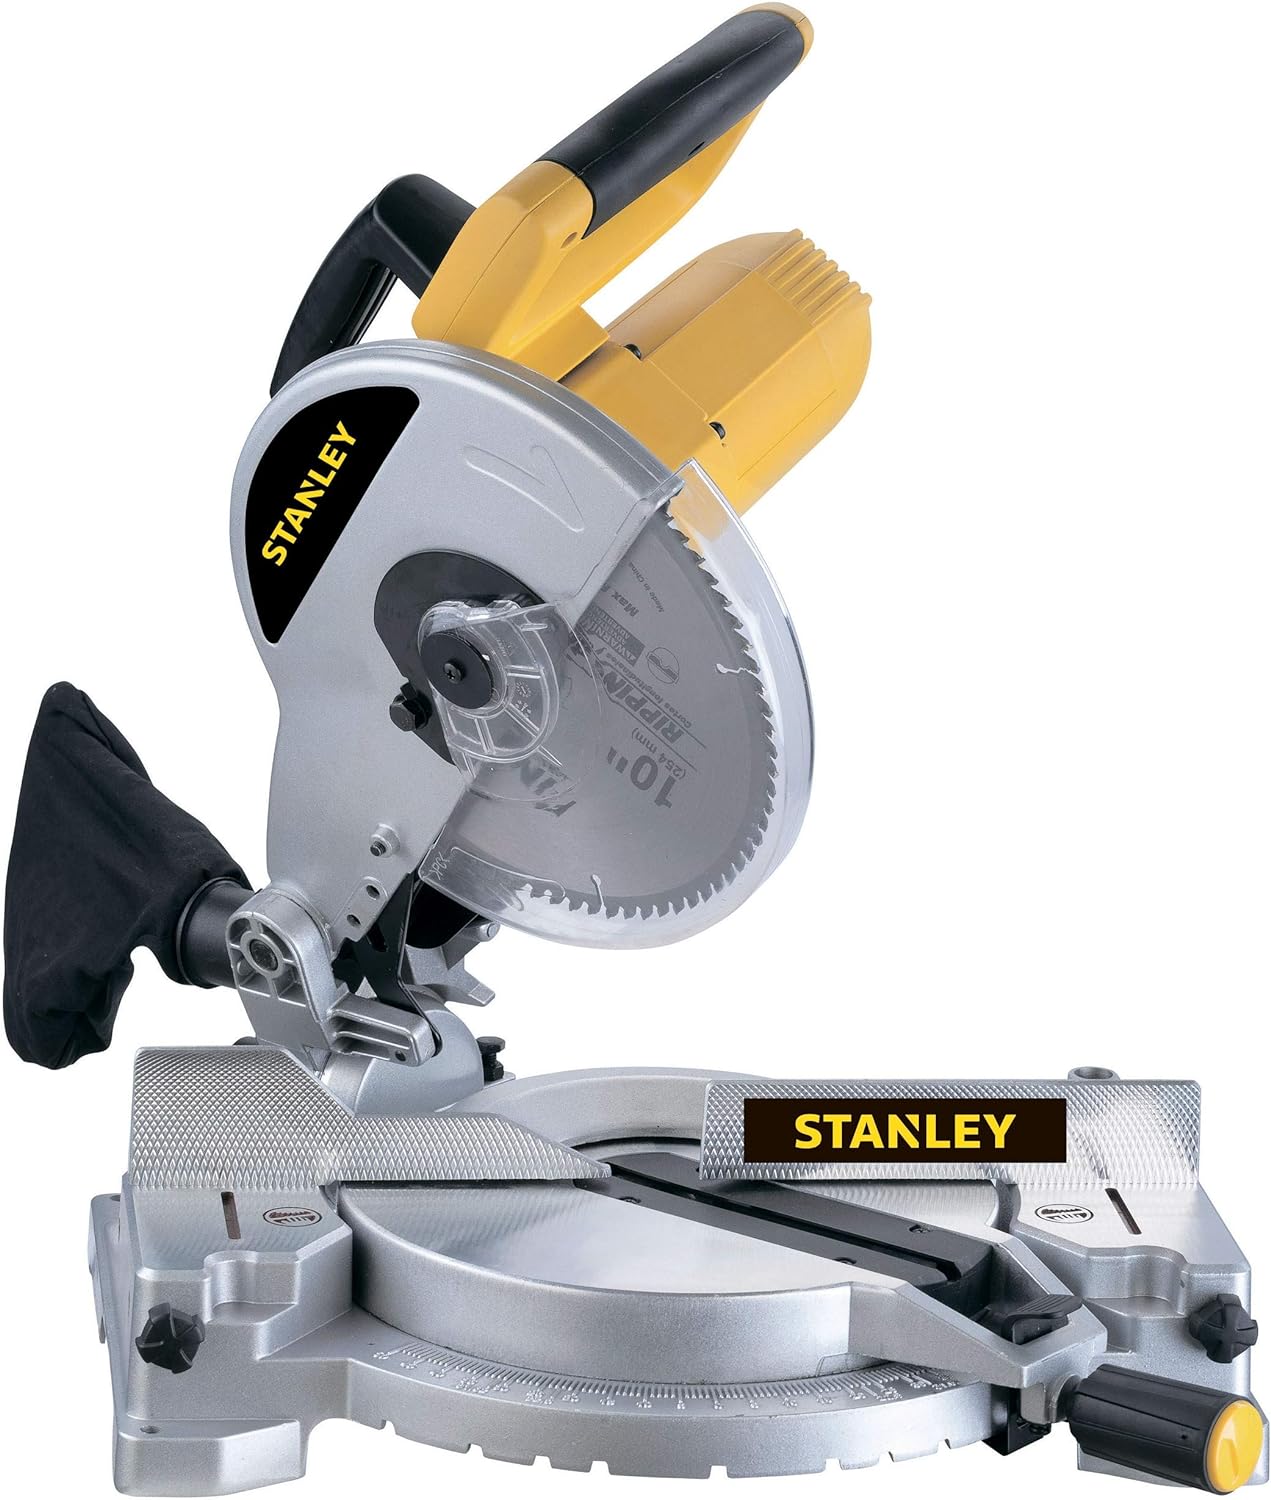 Stanley 14"/355mm Cut-Off Chop Saw 2200W - SSC22-B5 | Supply Master, Accra, Ghana Bench & Stationary Tool Buy Tools hardware Building materials